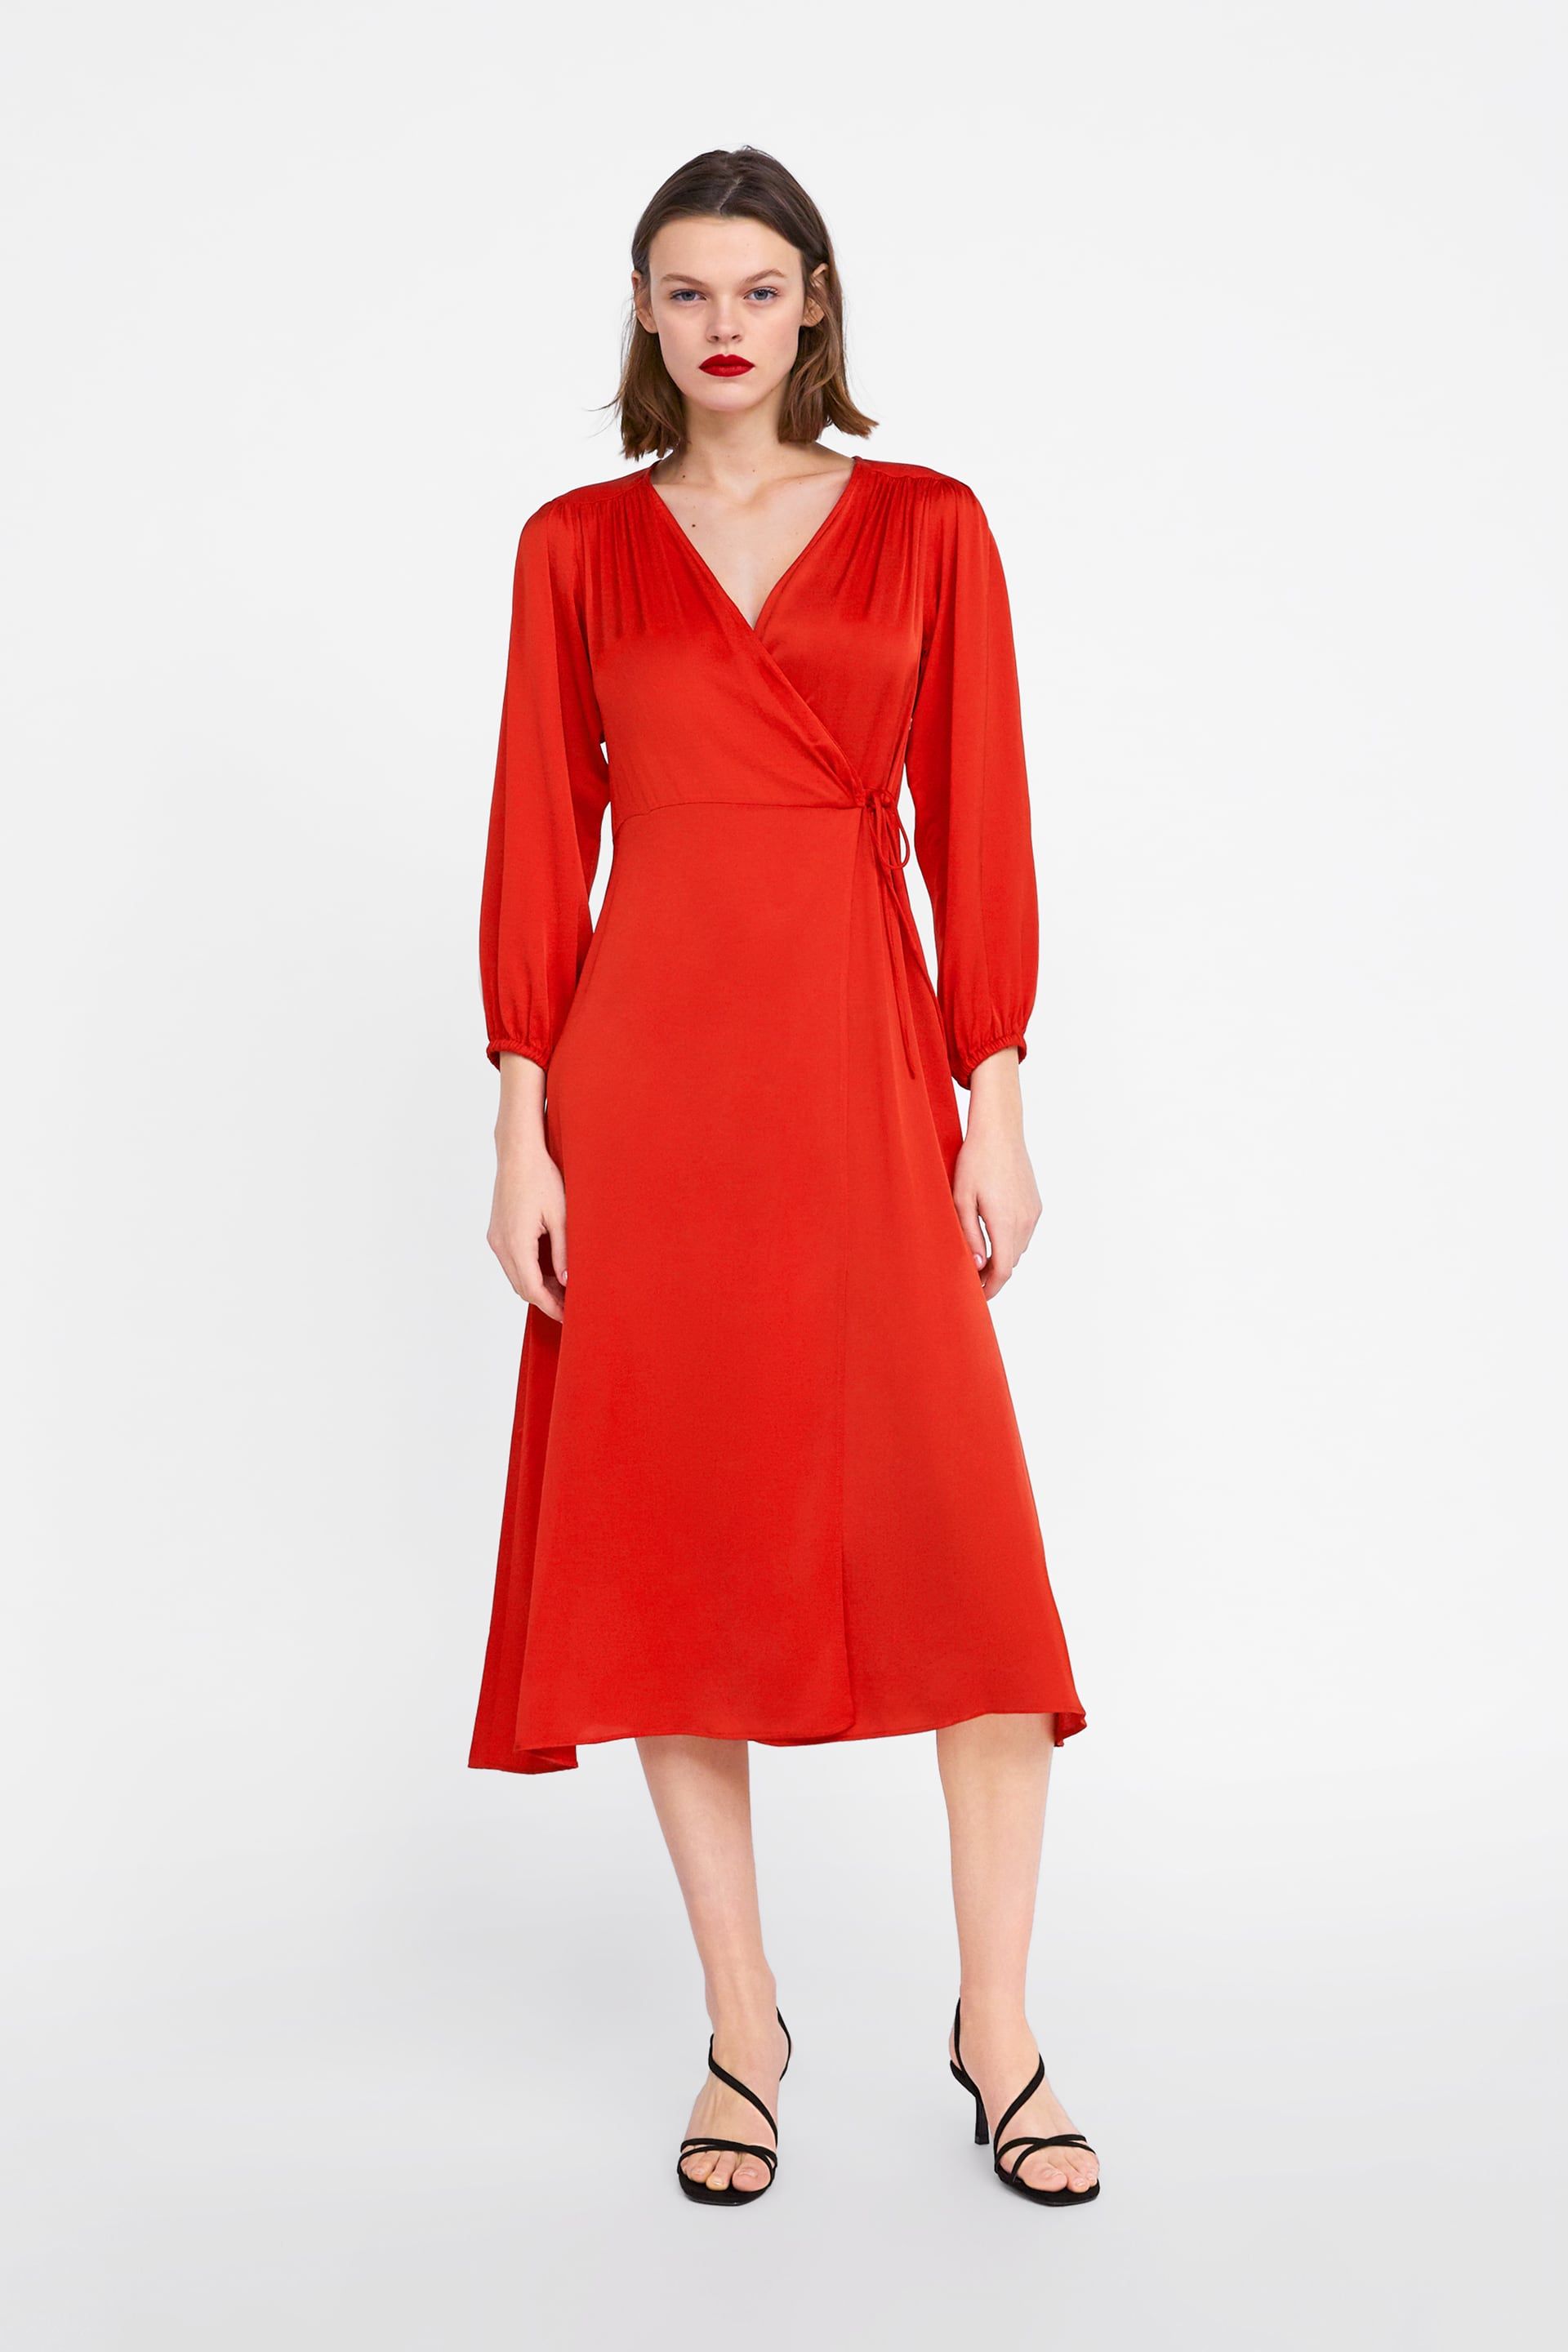 Shop 12 the Best Spring Dresses at Zara in 2019 | Who What Wear